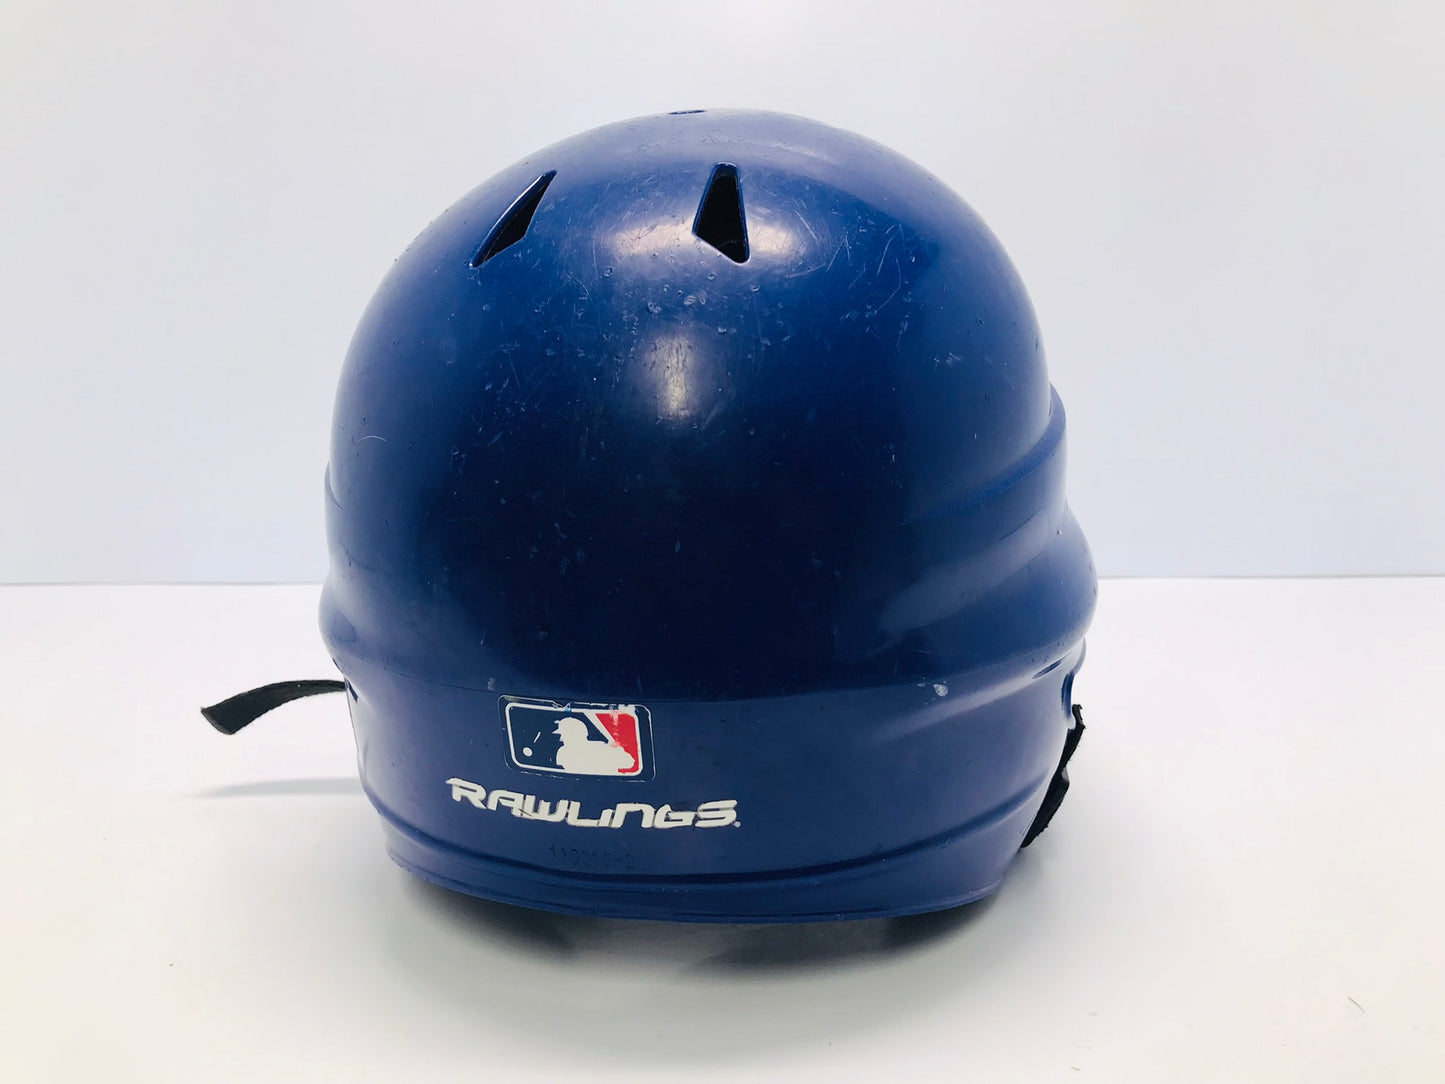 Baseball Helmet Junior Size 6.5 x 7.5 Age 7-12 Rawlings Blue With Cage